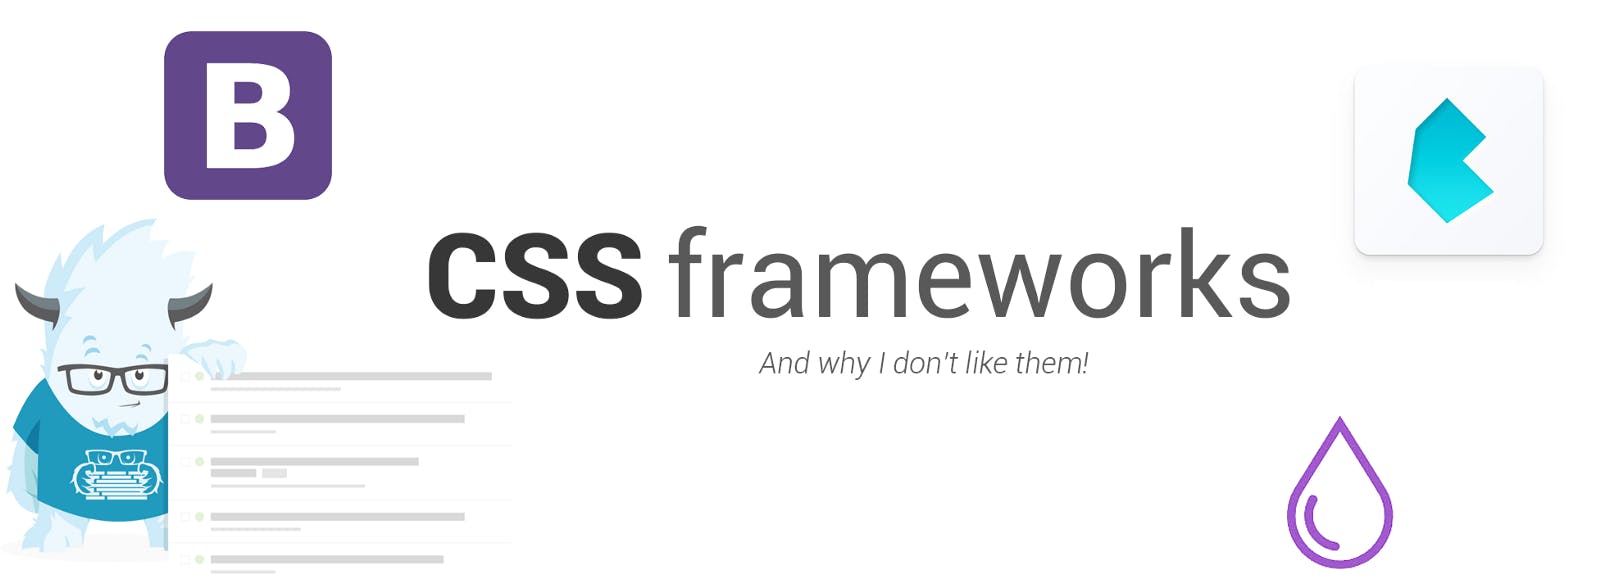 featured image - A case against CSS frameworks